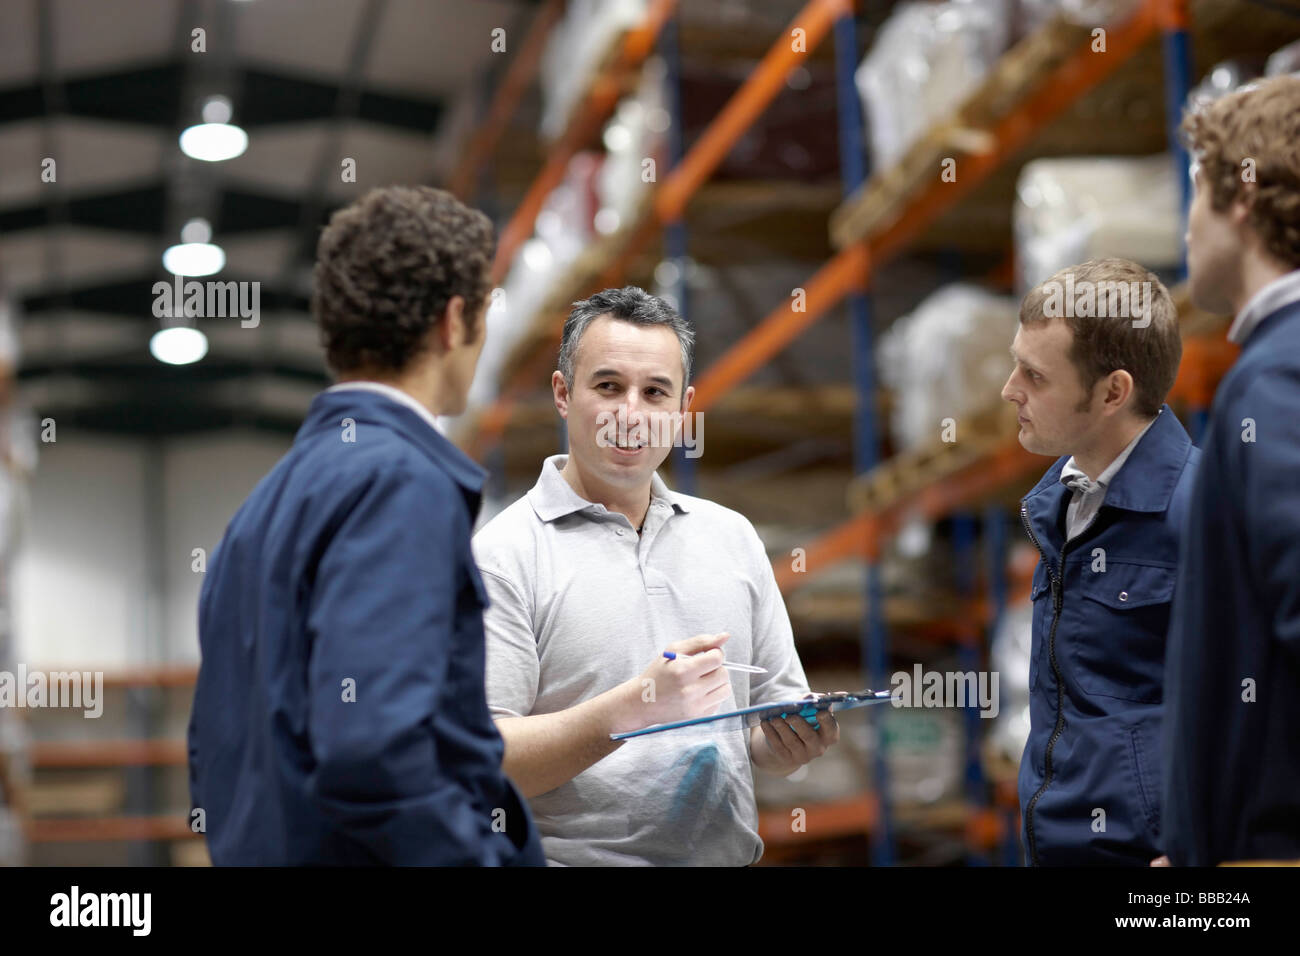 Workers in warehouse Stock Photo